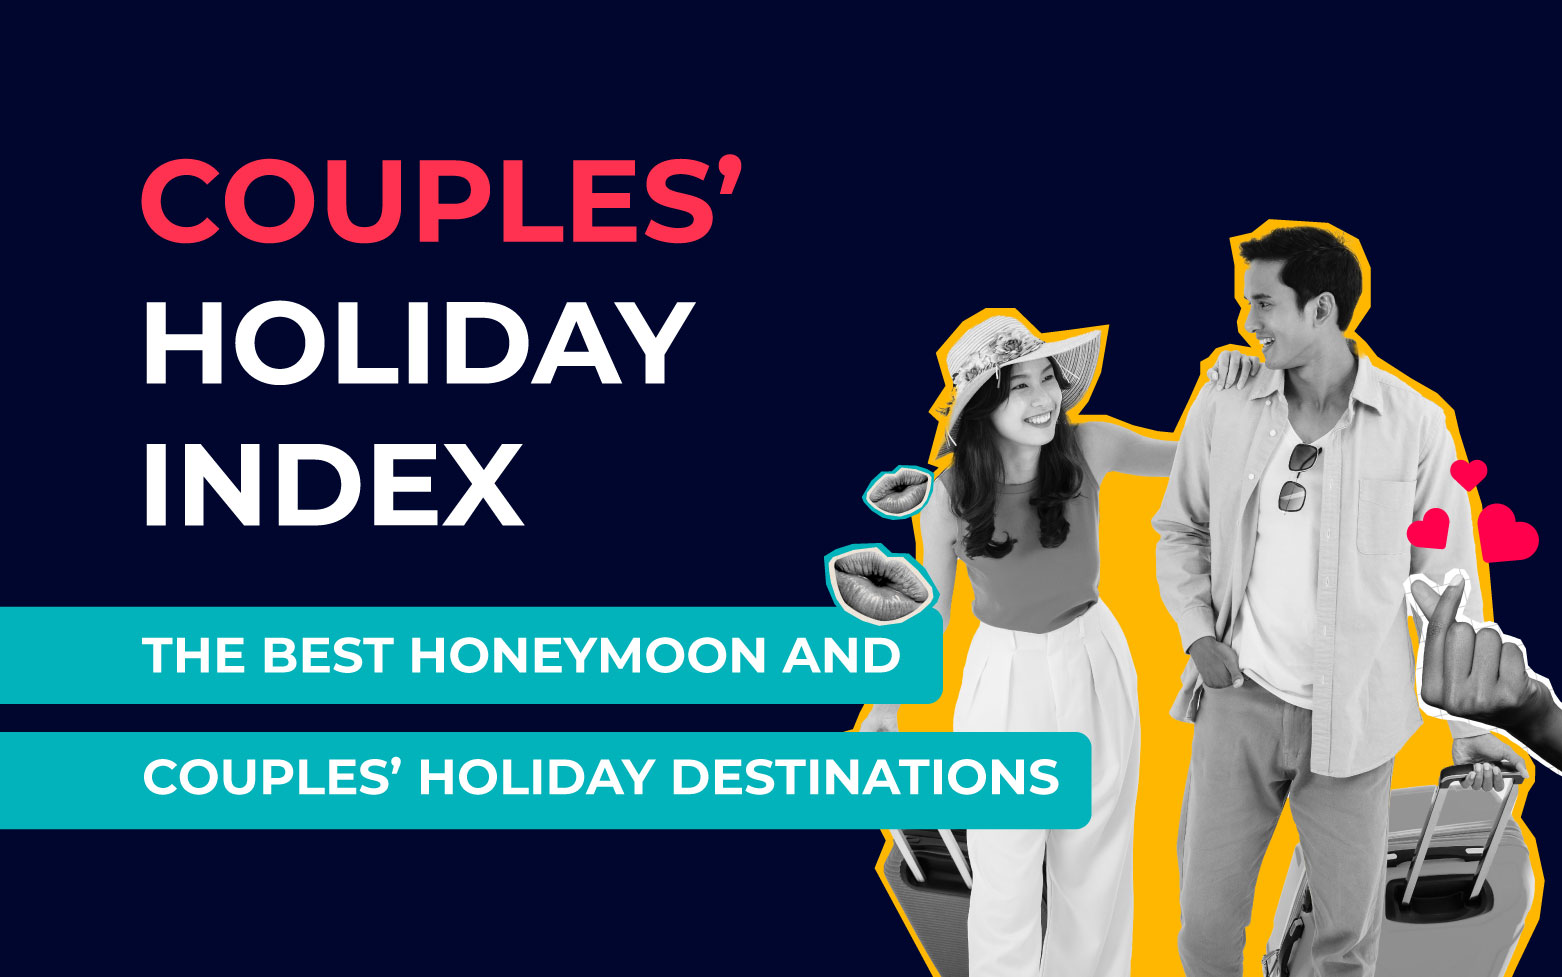 Best Honeymoon and Couples Holiday Destinations